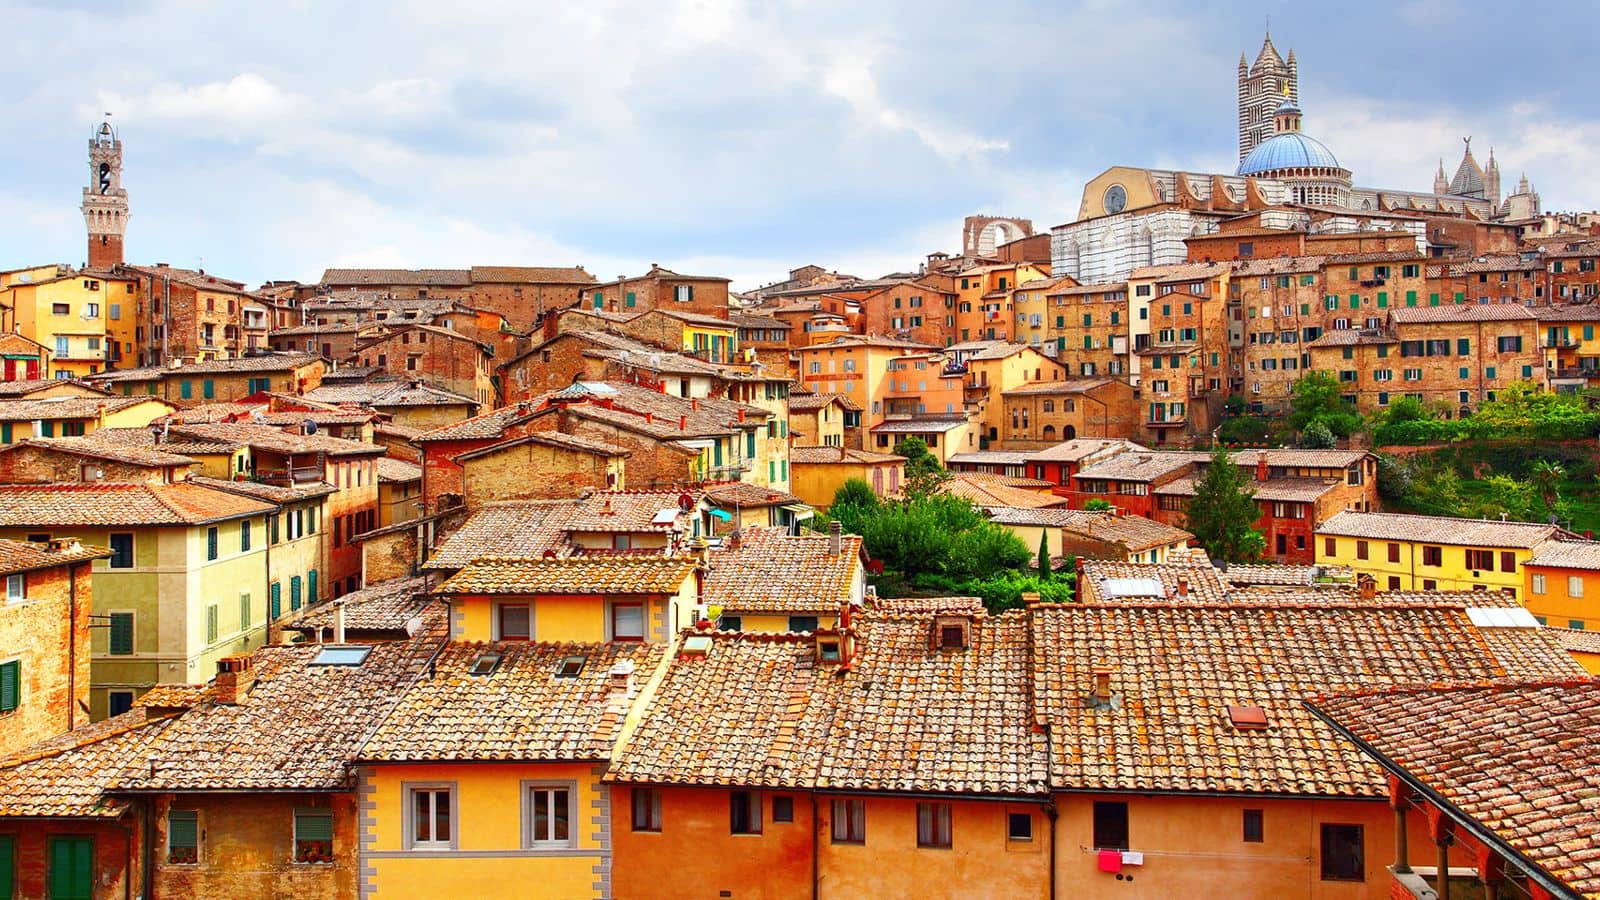 Have you been to Rome's enchanting hill town escapes